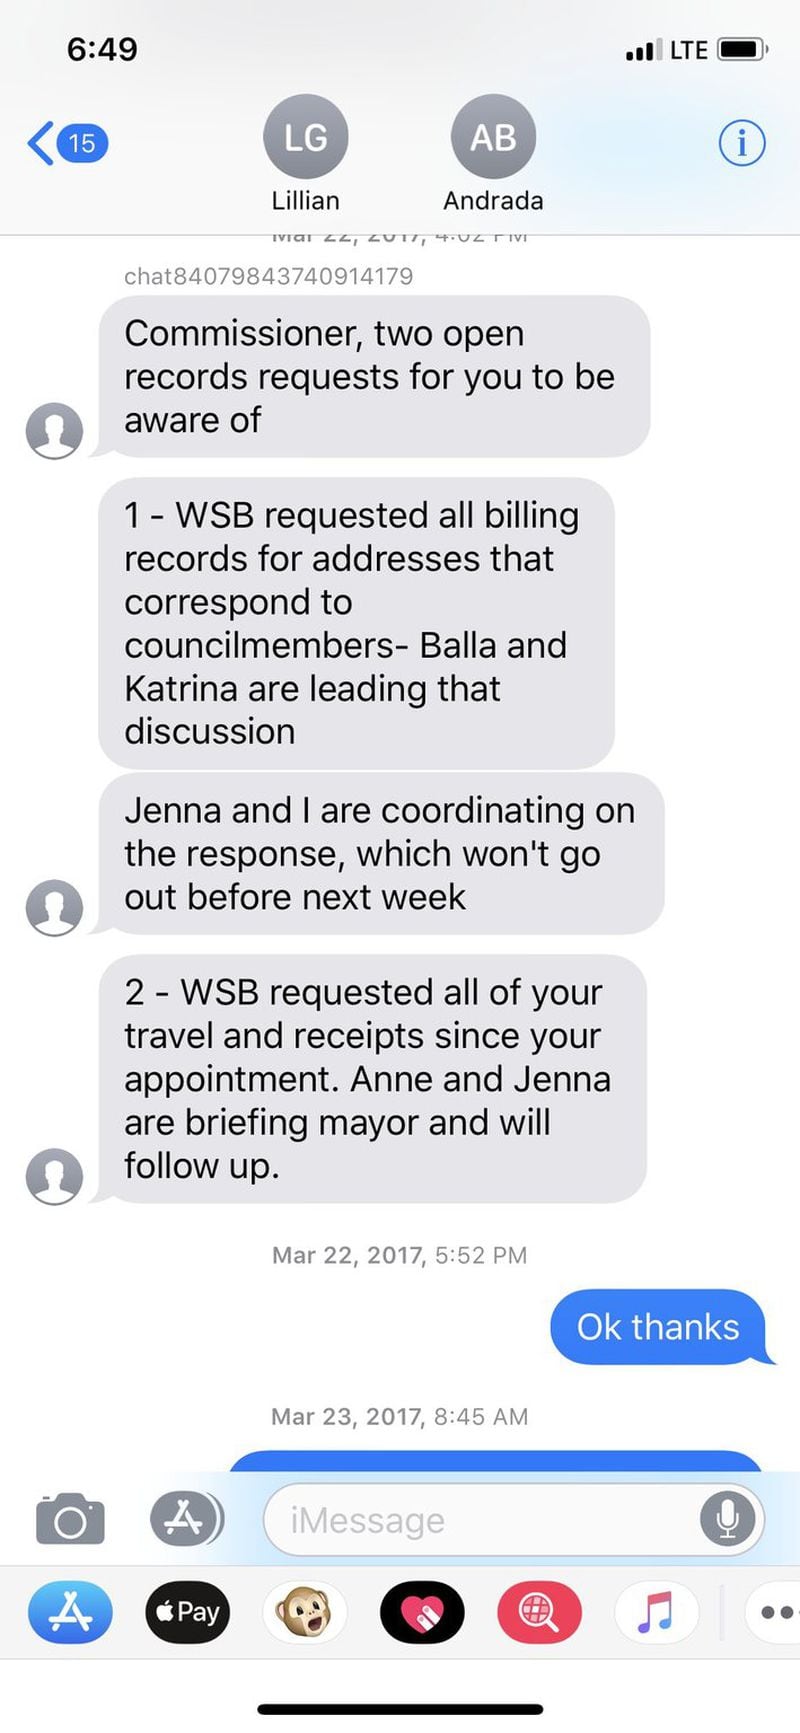 This text exchange between Atlanta Watershed Commissioner Kishia Powell and then-Watershed communications manager Lillian Govus shows Govus informed Powell of the Channel 2 open records request. Govus’ texts are in gray.